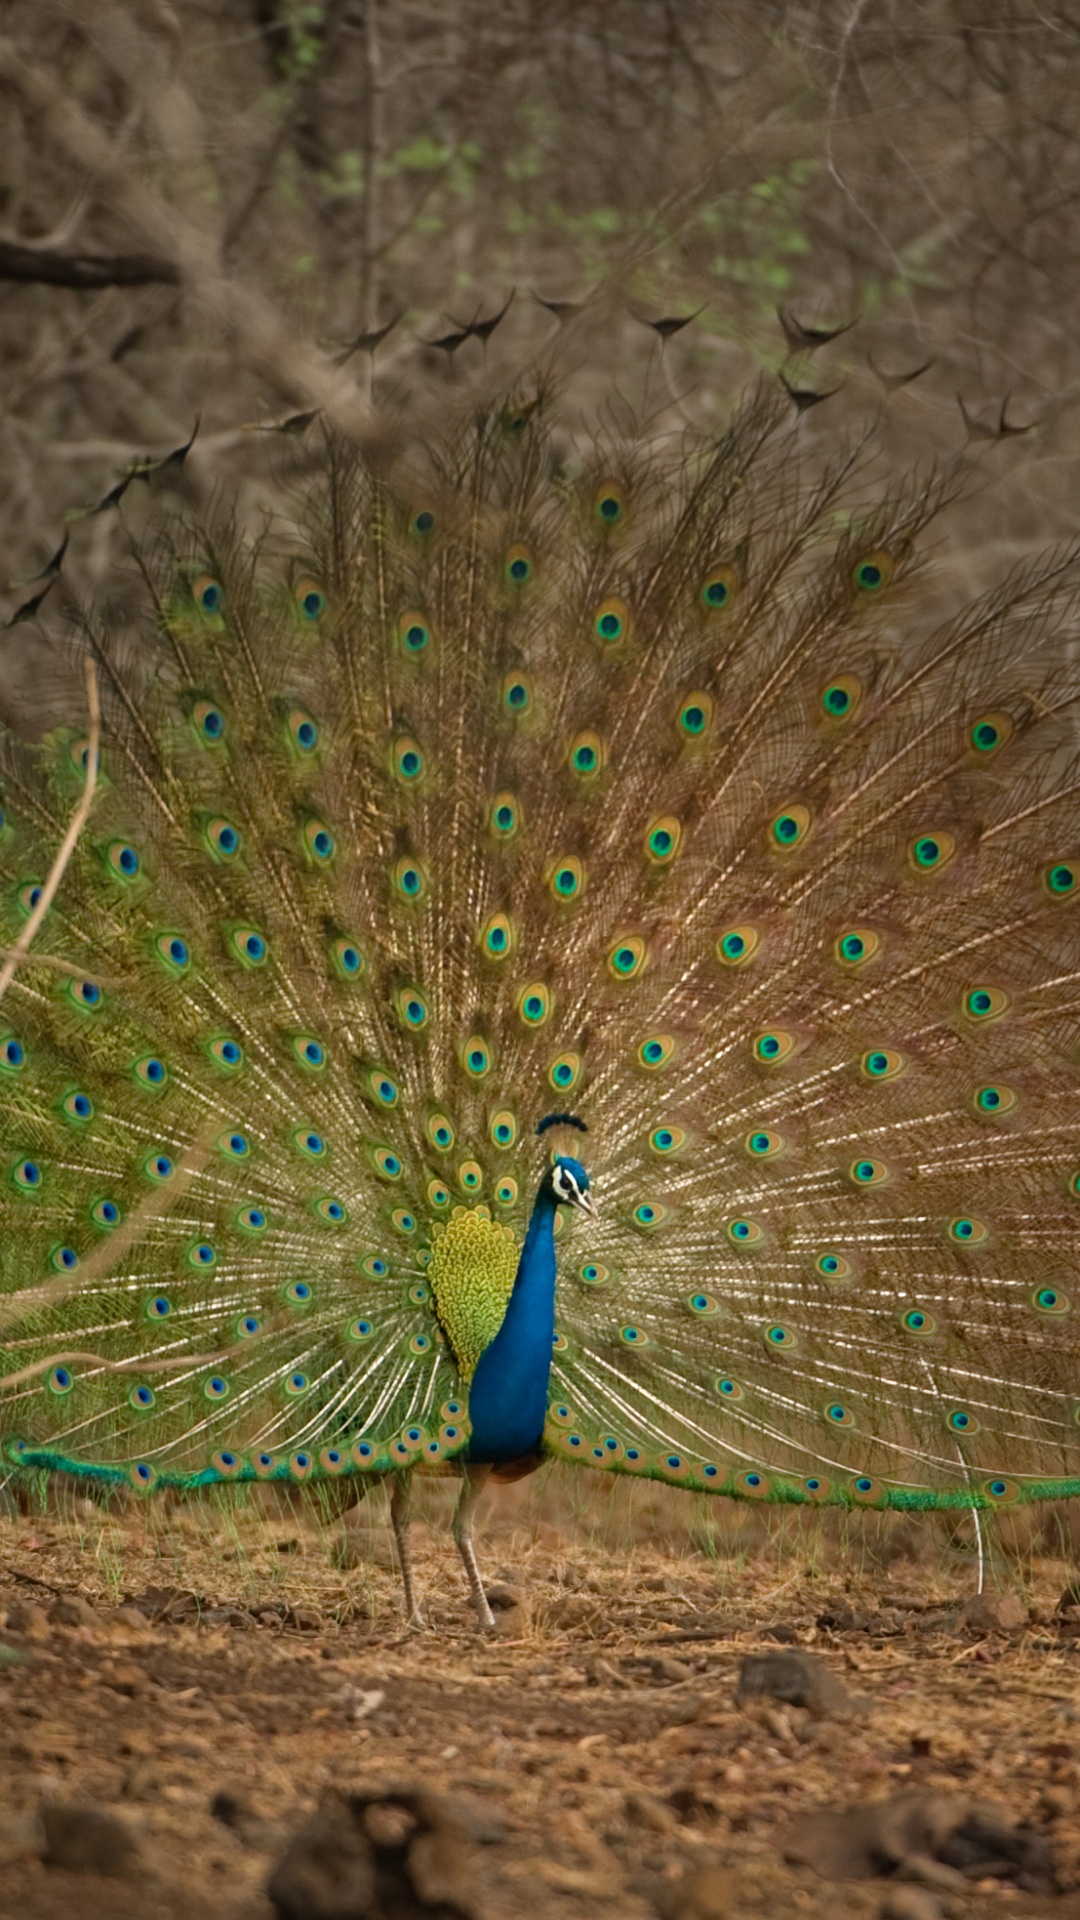 Peacock on Brown Soil Near Bare Trees During Daytime. Wallpaper in 1080x1920 Resolution